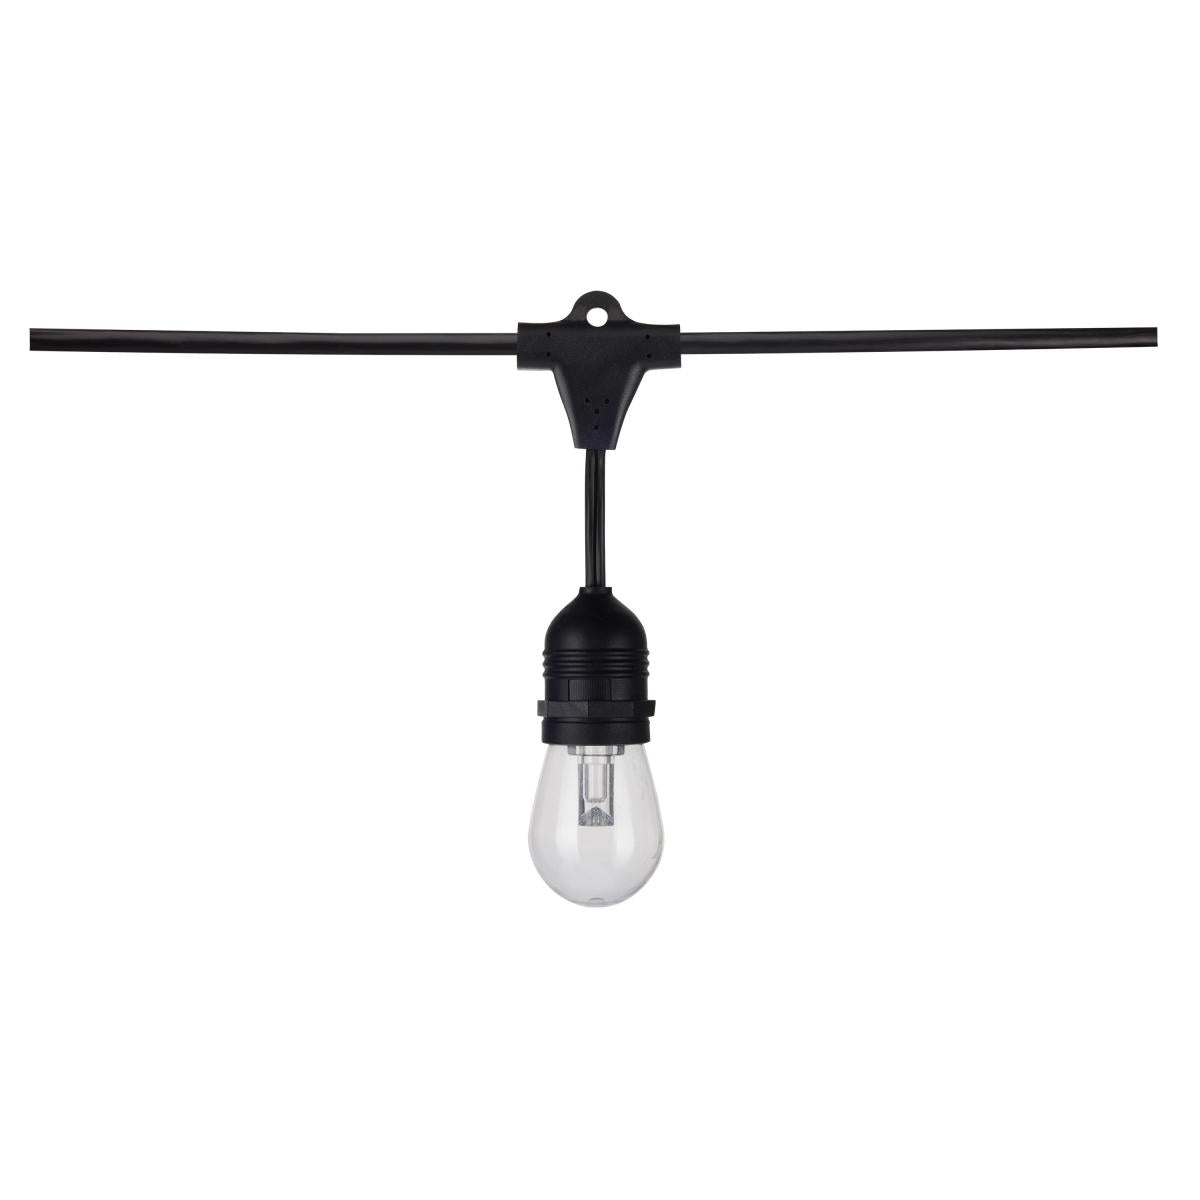 48FT, LED String Light; 15-S14 lamps, 12 Volts, RGBW with Infrared Remote